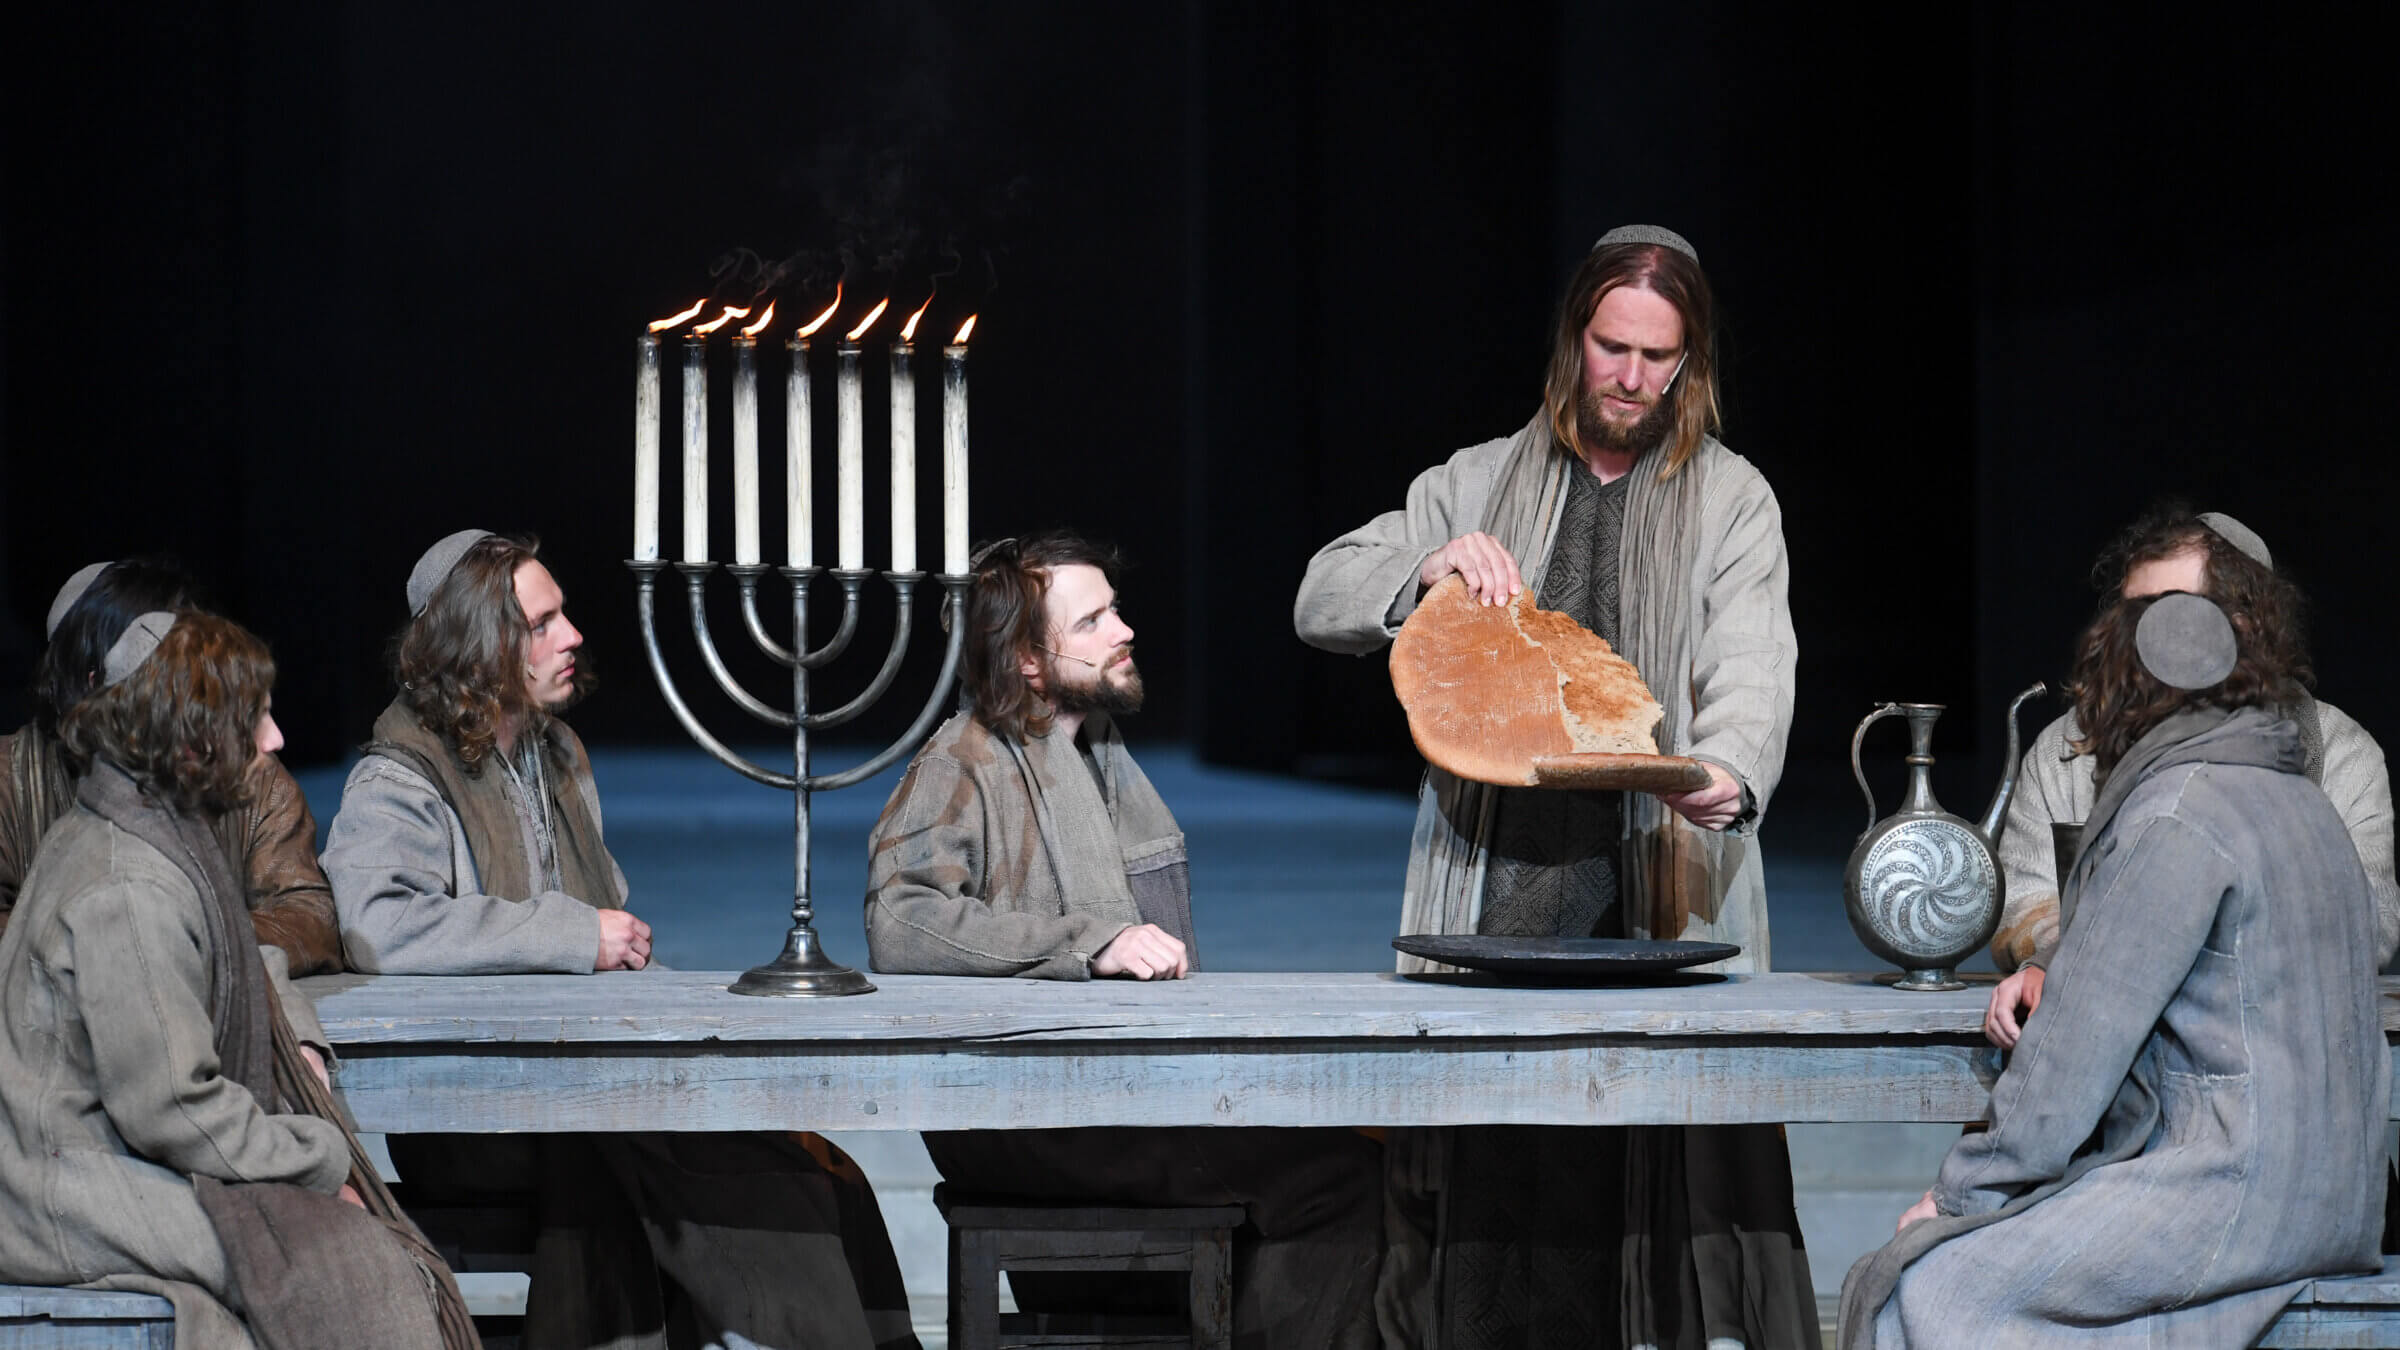 Jesus shares bread with his disciples during the Last Supper at the dress rehearsal for the Oberammergau Passion Play.